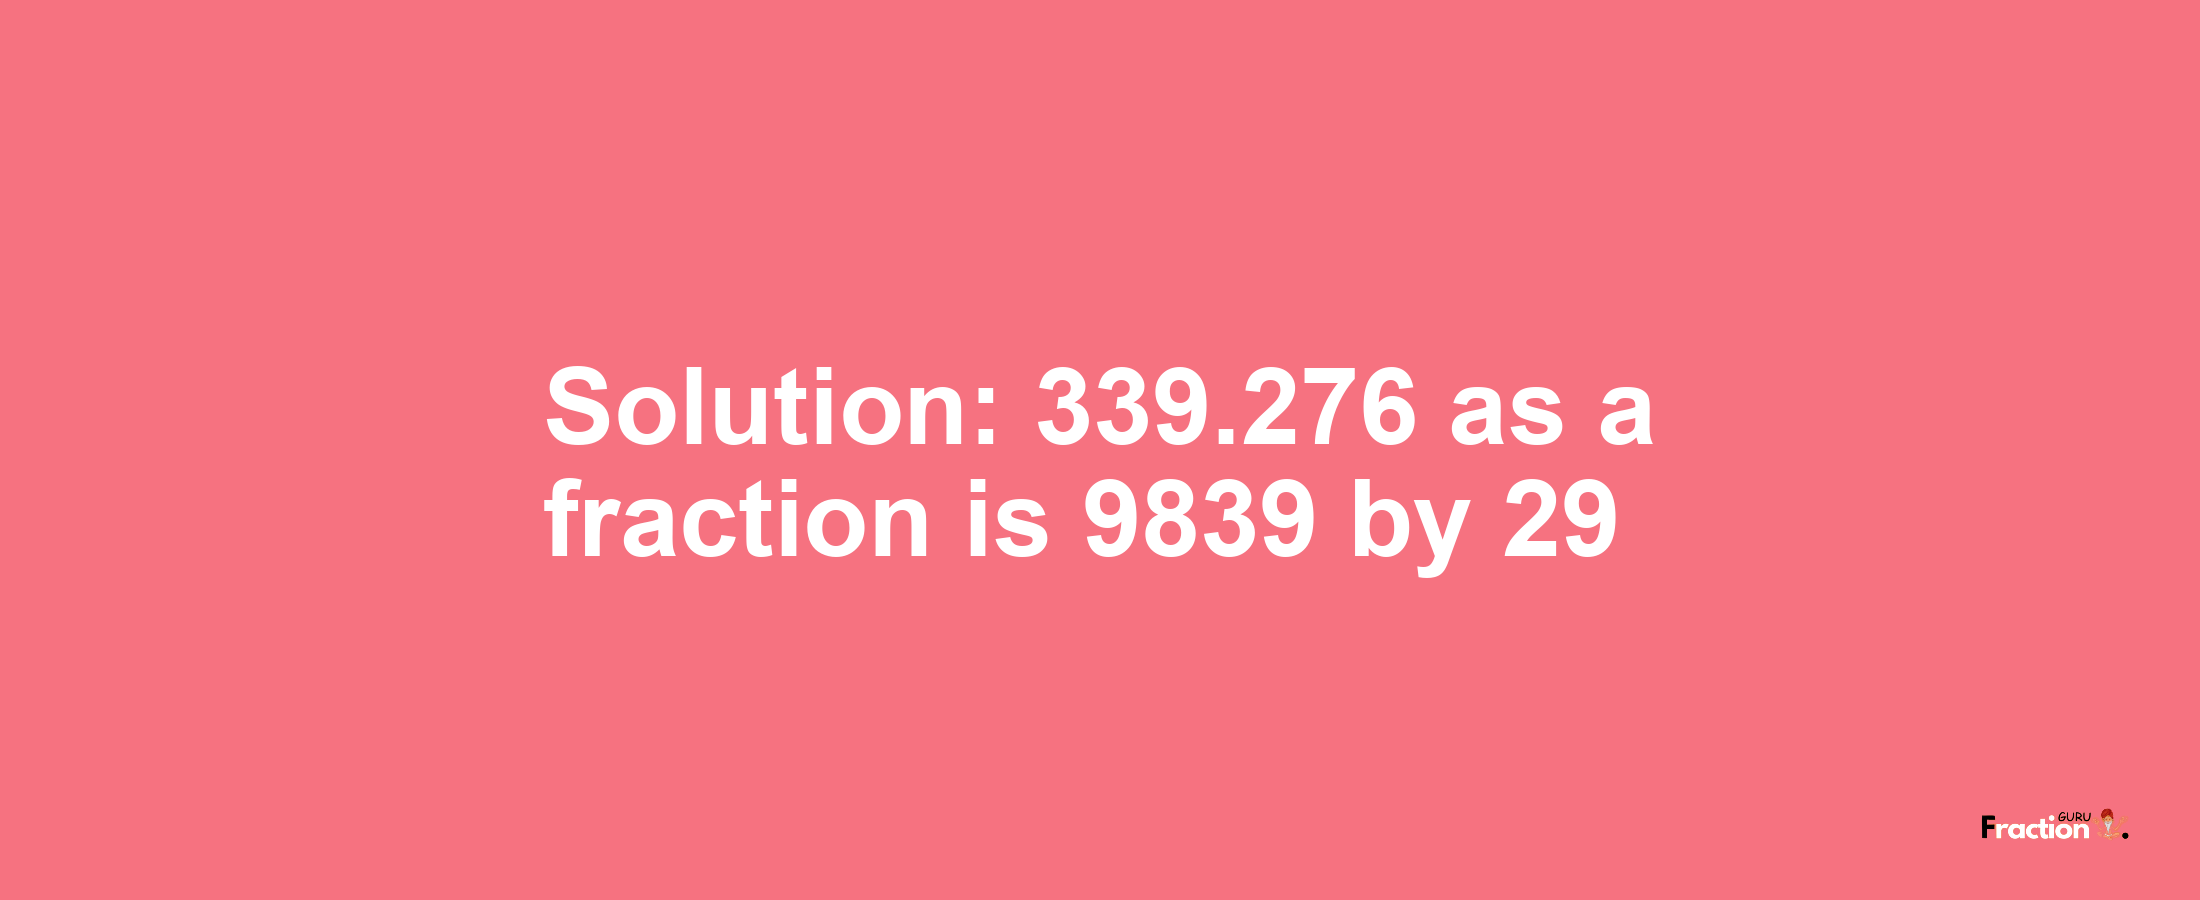 Solution:339.276 as a fraction is 9839/29